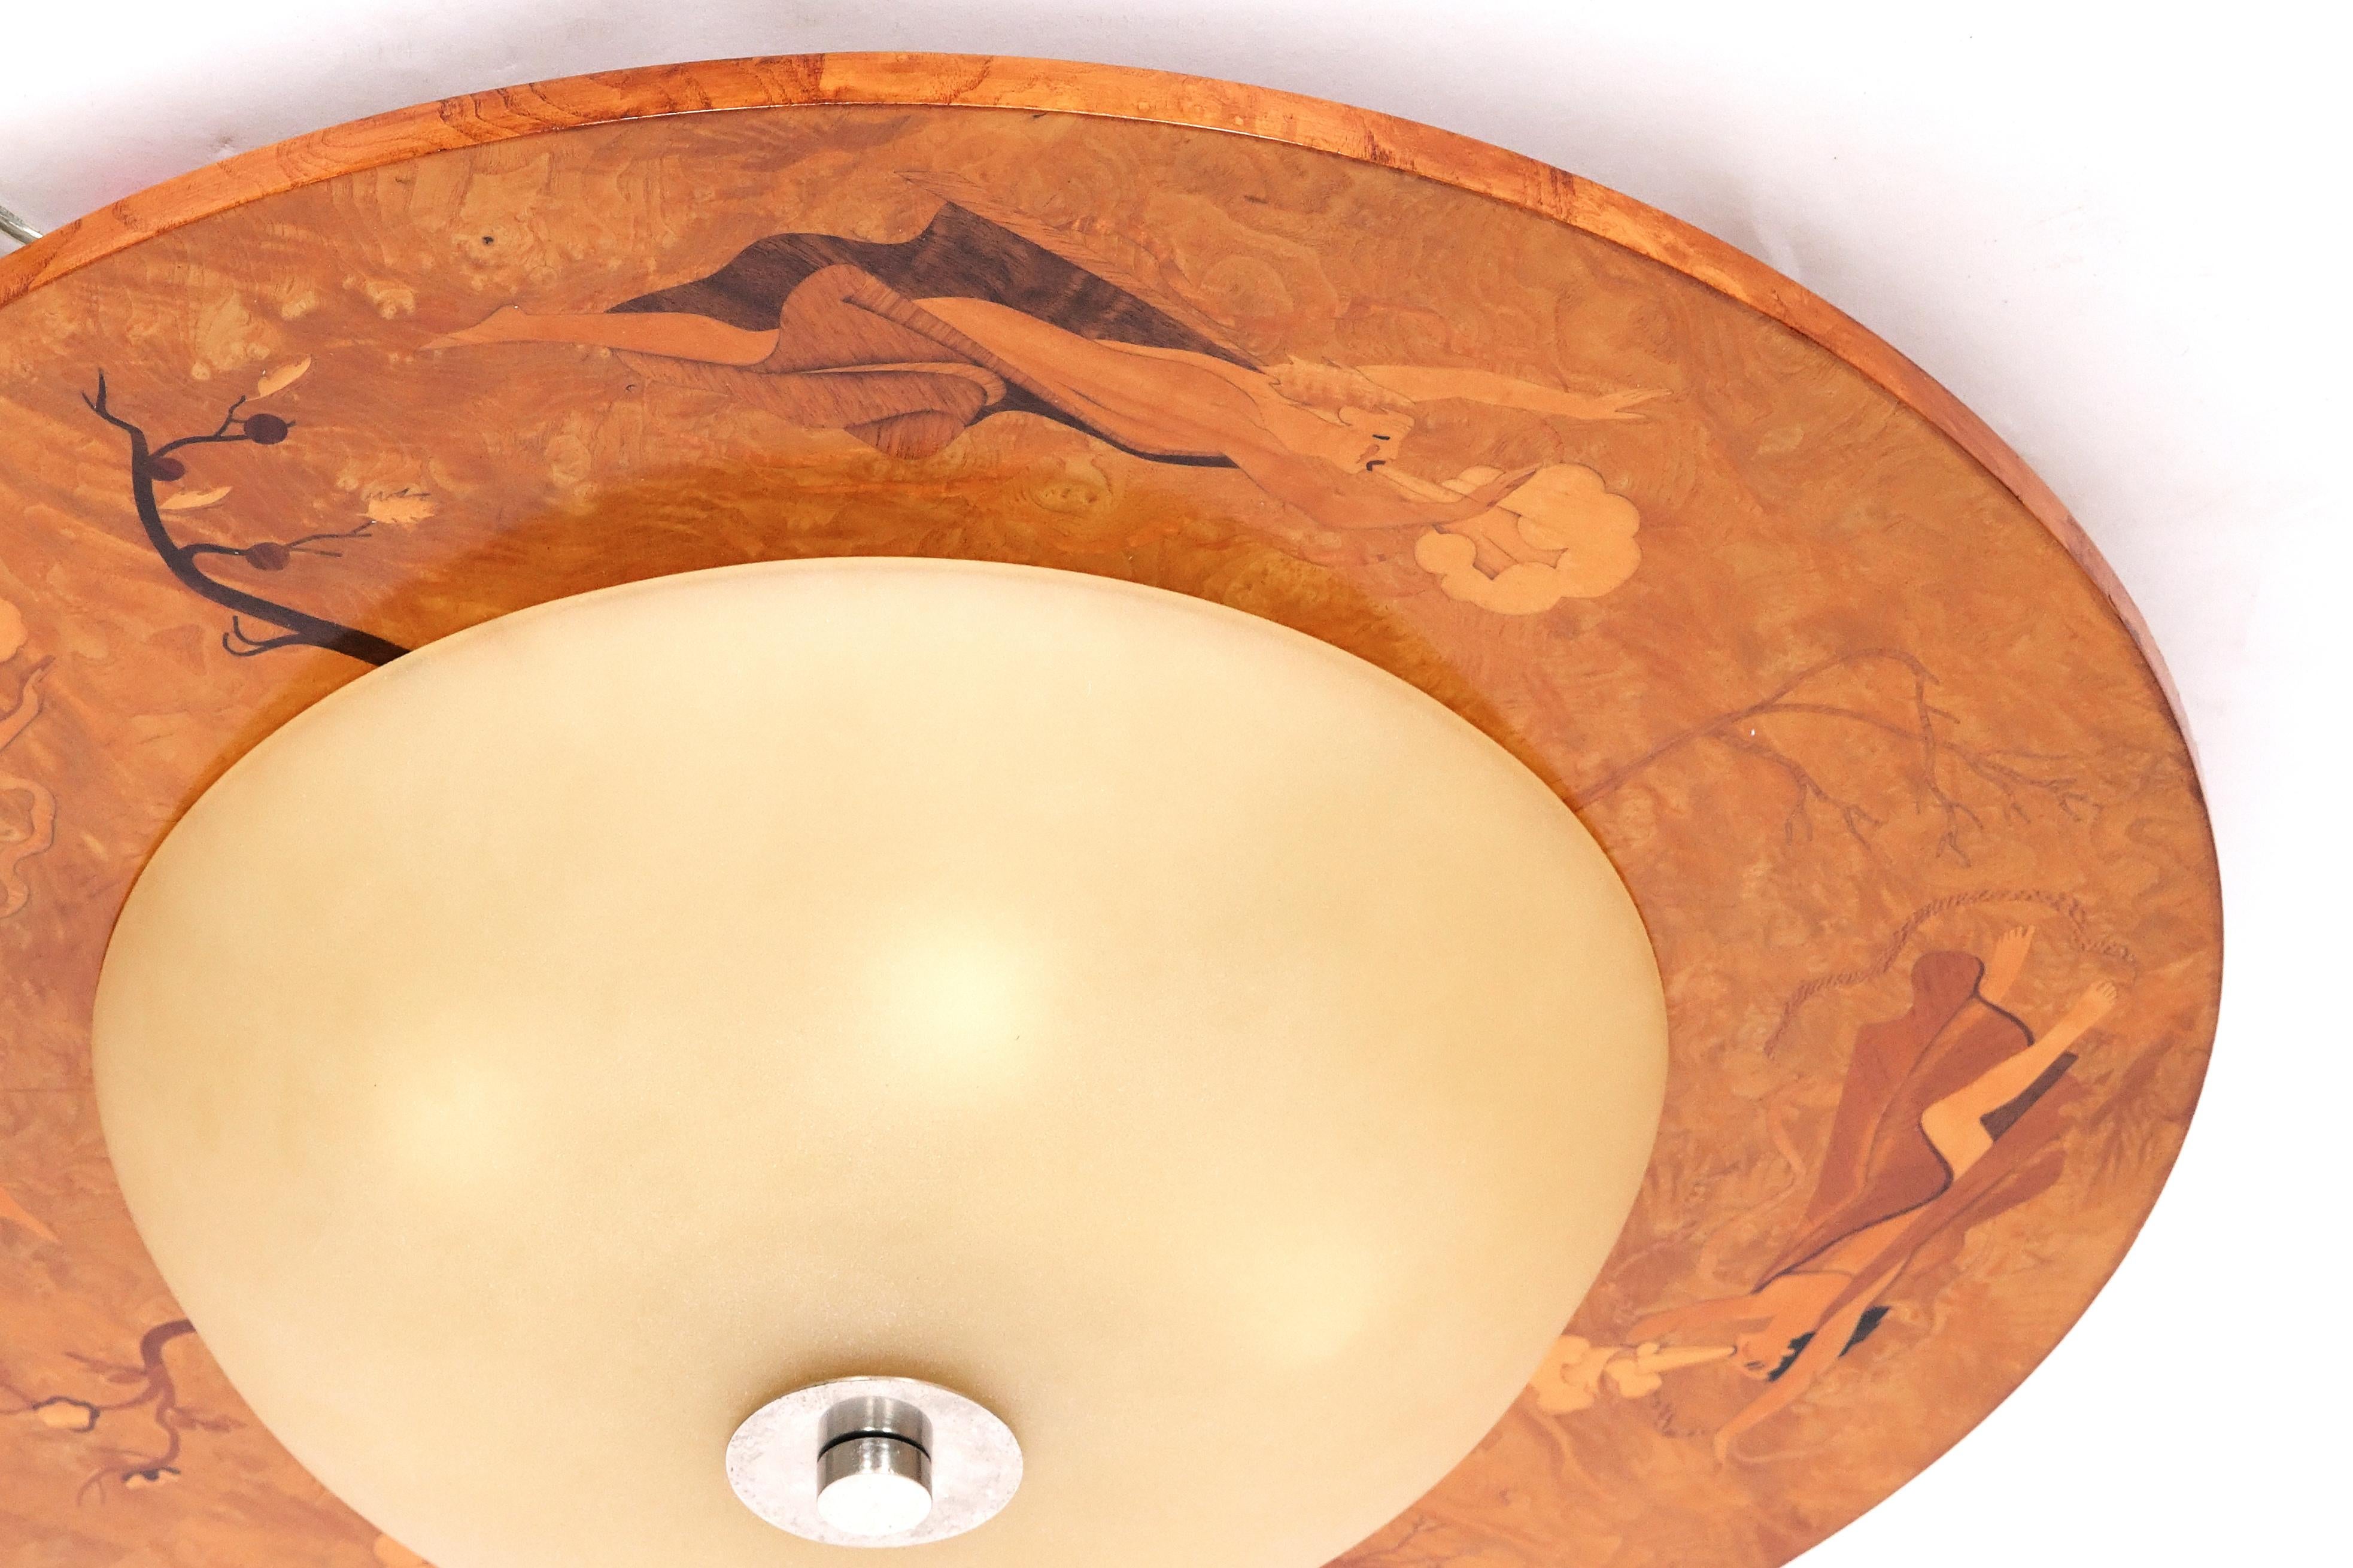 A Swedish grace period flush mount ceiling fixture with a round frame having figured birch veneer inlaid with figures depicting the elements inter-spurted with stylized trees. circa 1930s. The wooden frame has six medium sockets (100 watts LED or